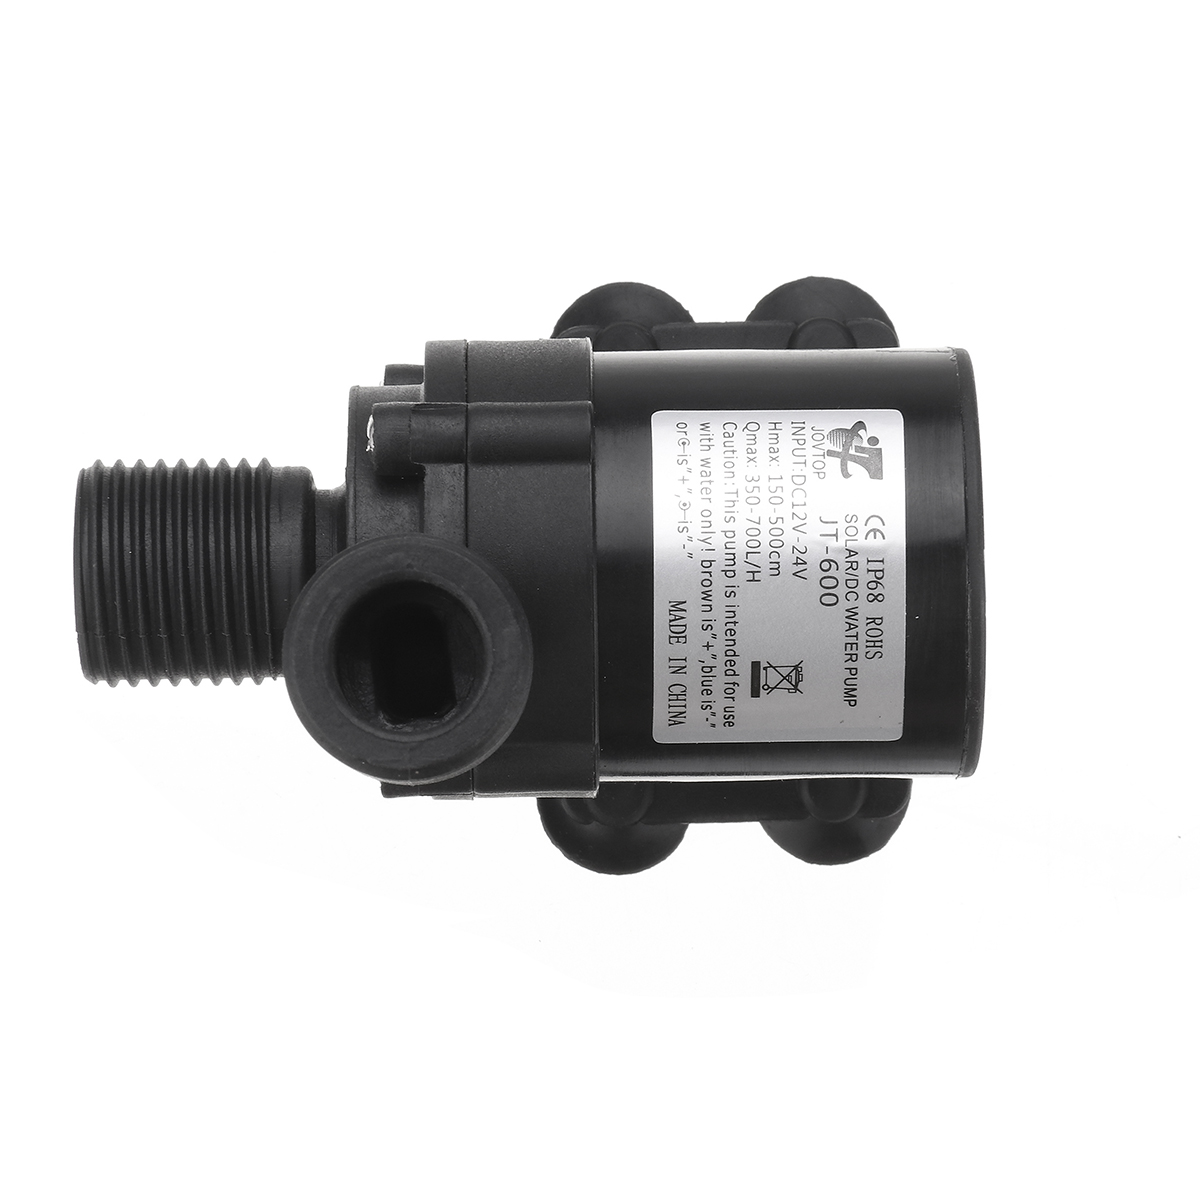 24V12V-Hot-Water-Pump-for-Circulating-Micro-DC-Water-Pump-With-12-Inch-Threaded-Multifunction-Brushl-1435180-8